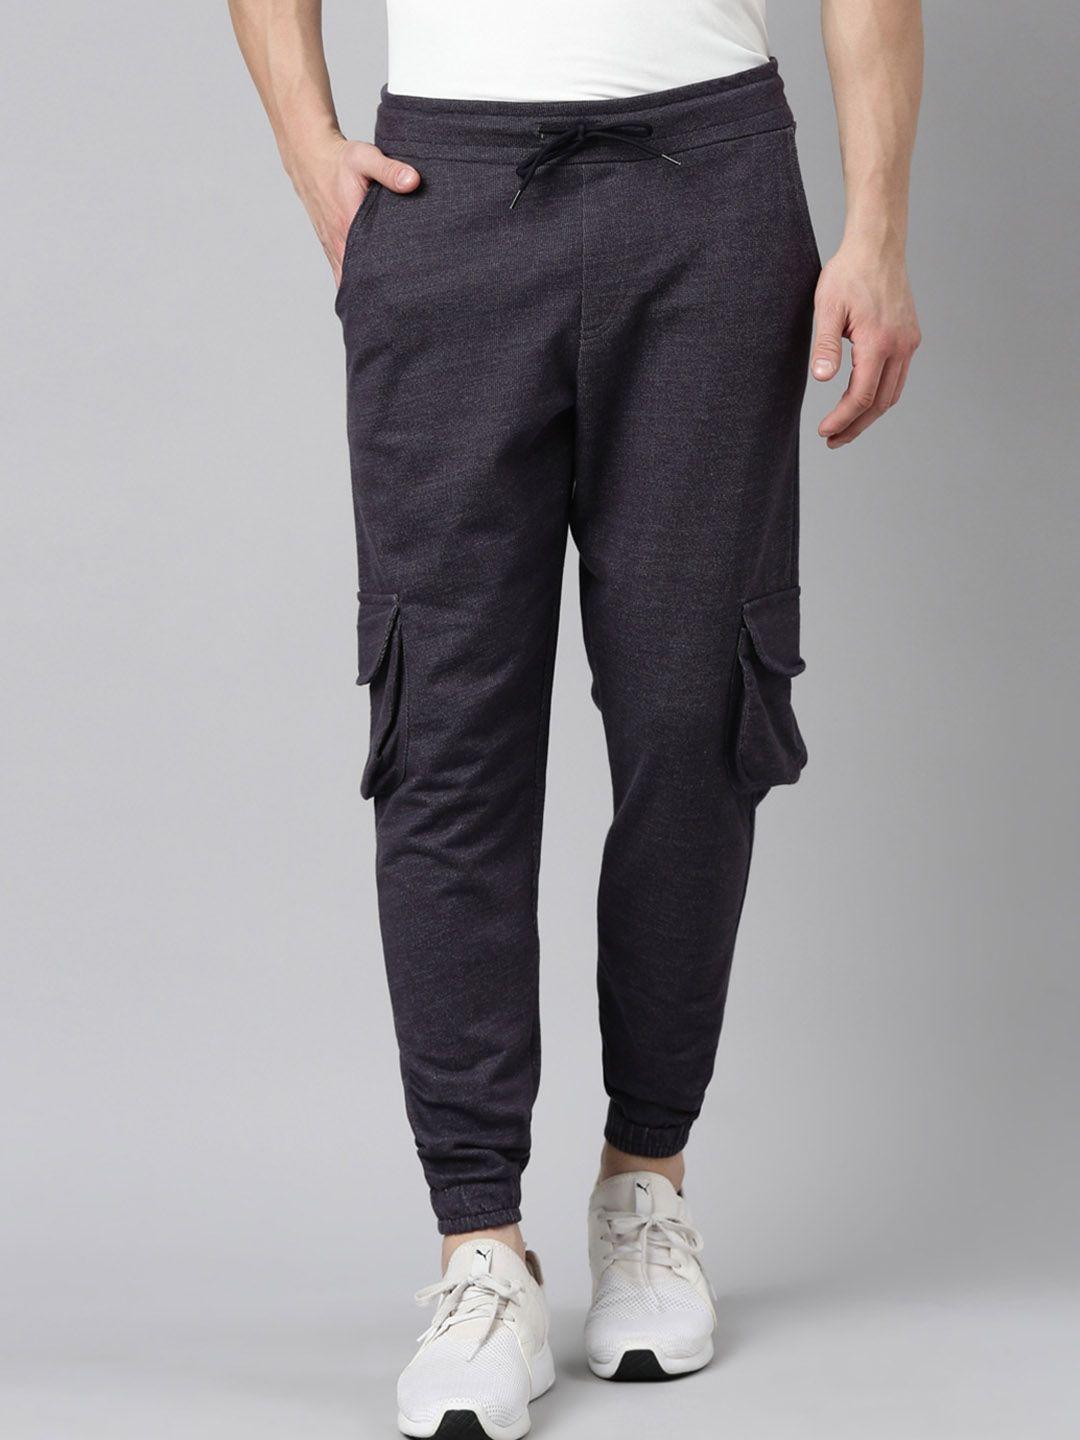 madsto-menmid-rise-cotton-joggers